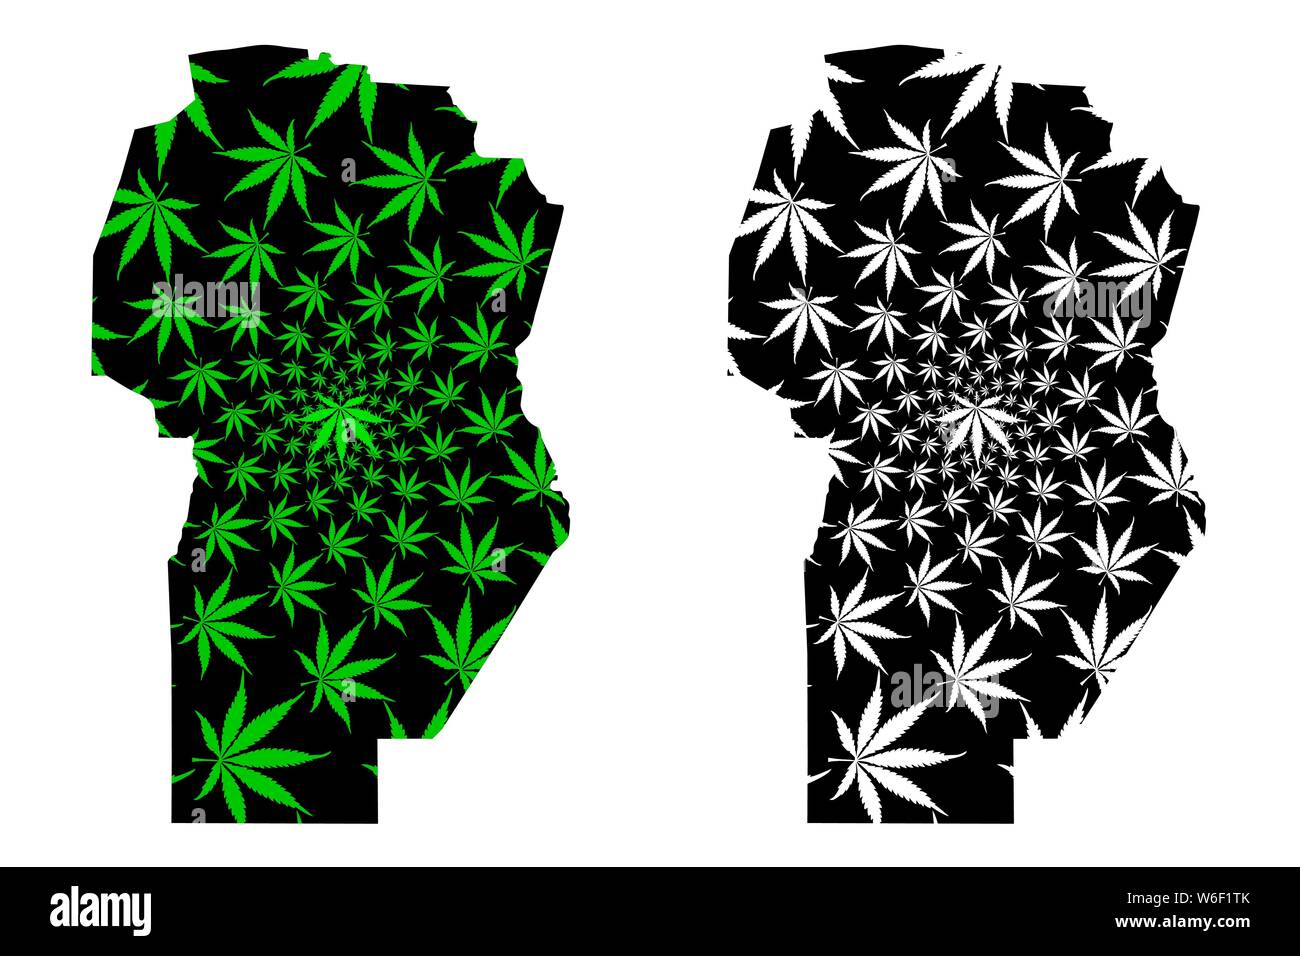 Cordoba (Region of Argentina, Argentine Republic, Provinces of Argentina) map is designed cannabis leaf green and black, Córdoba Province map made of Stock Vector